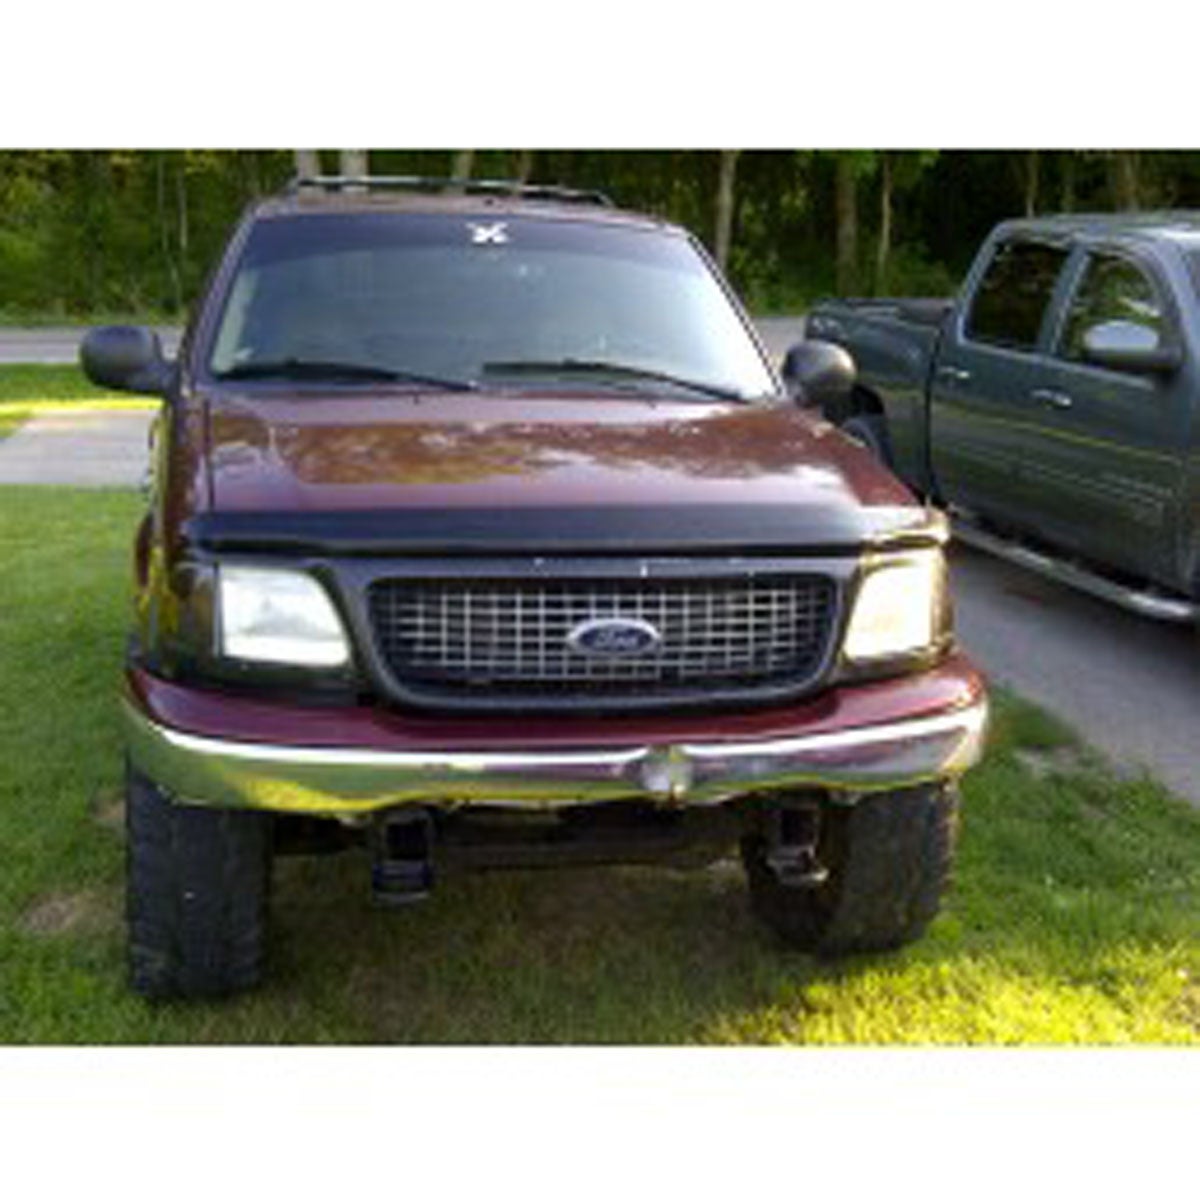 1999 Ford expedition parts for sale #2